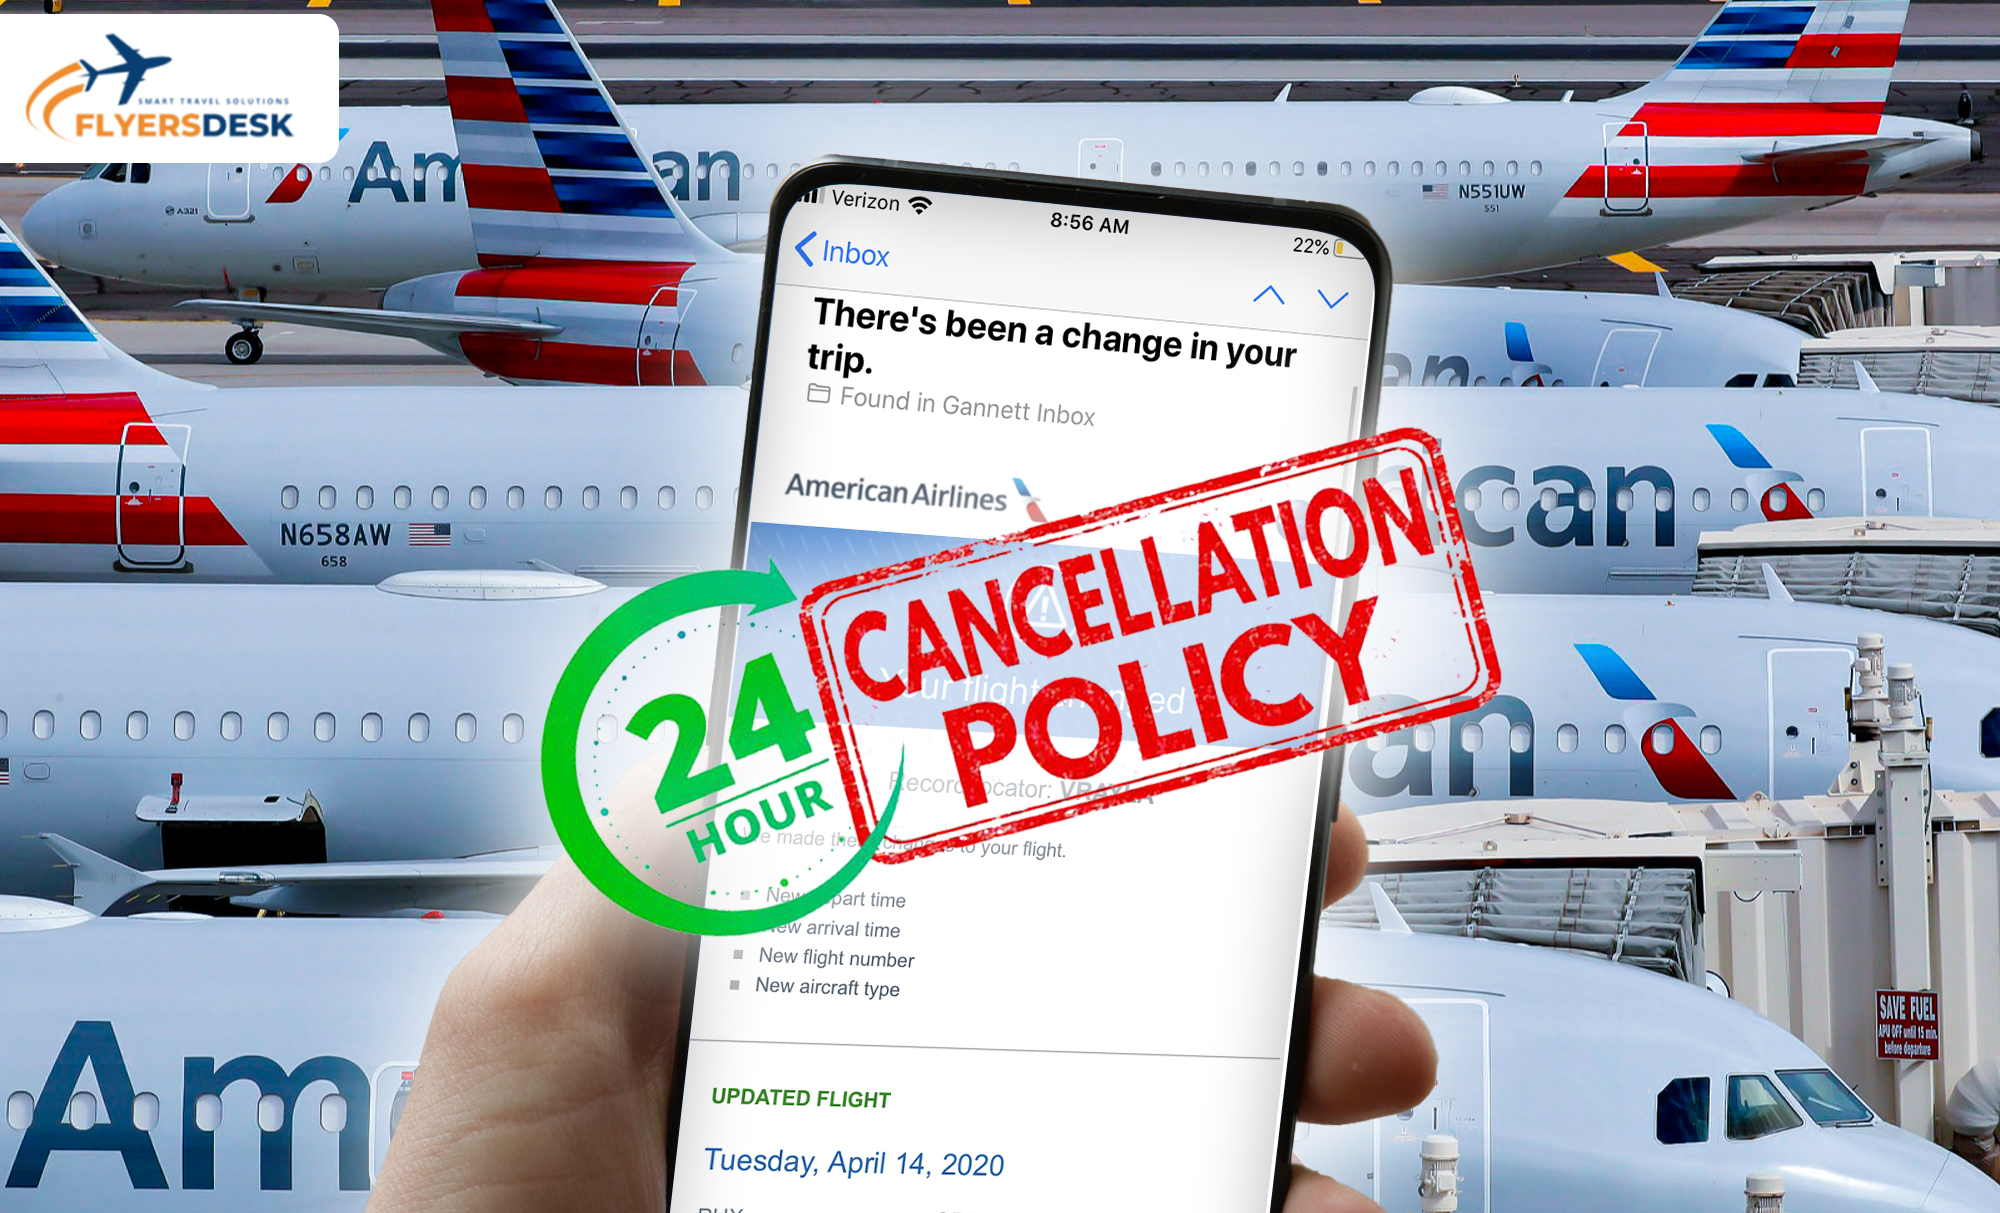 American Airlines 24 Hours Cancellation Policy